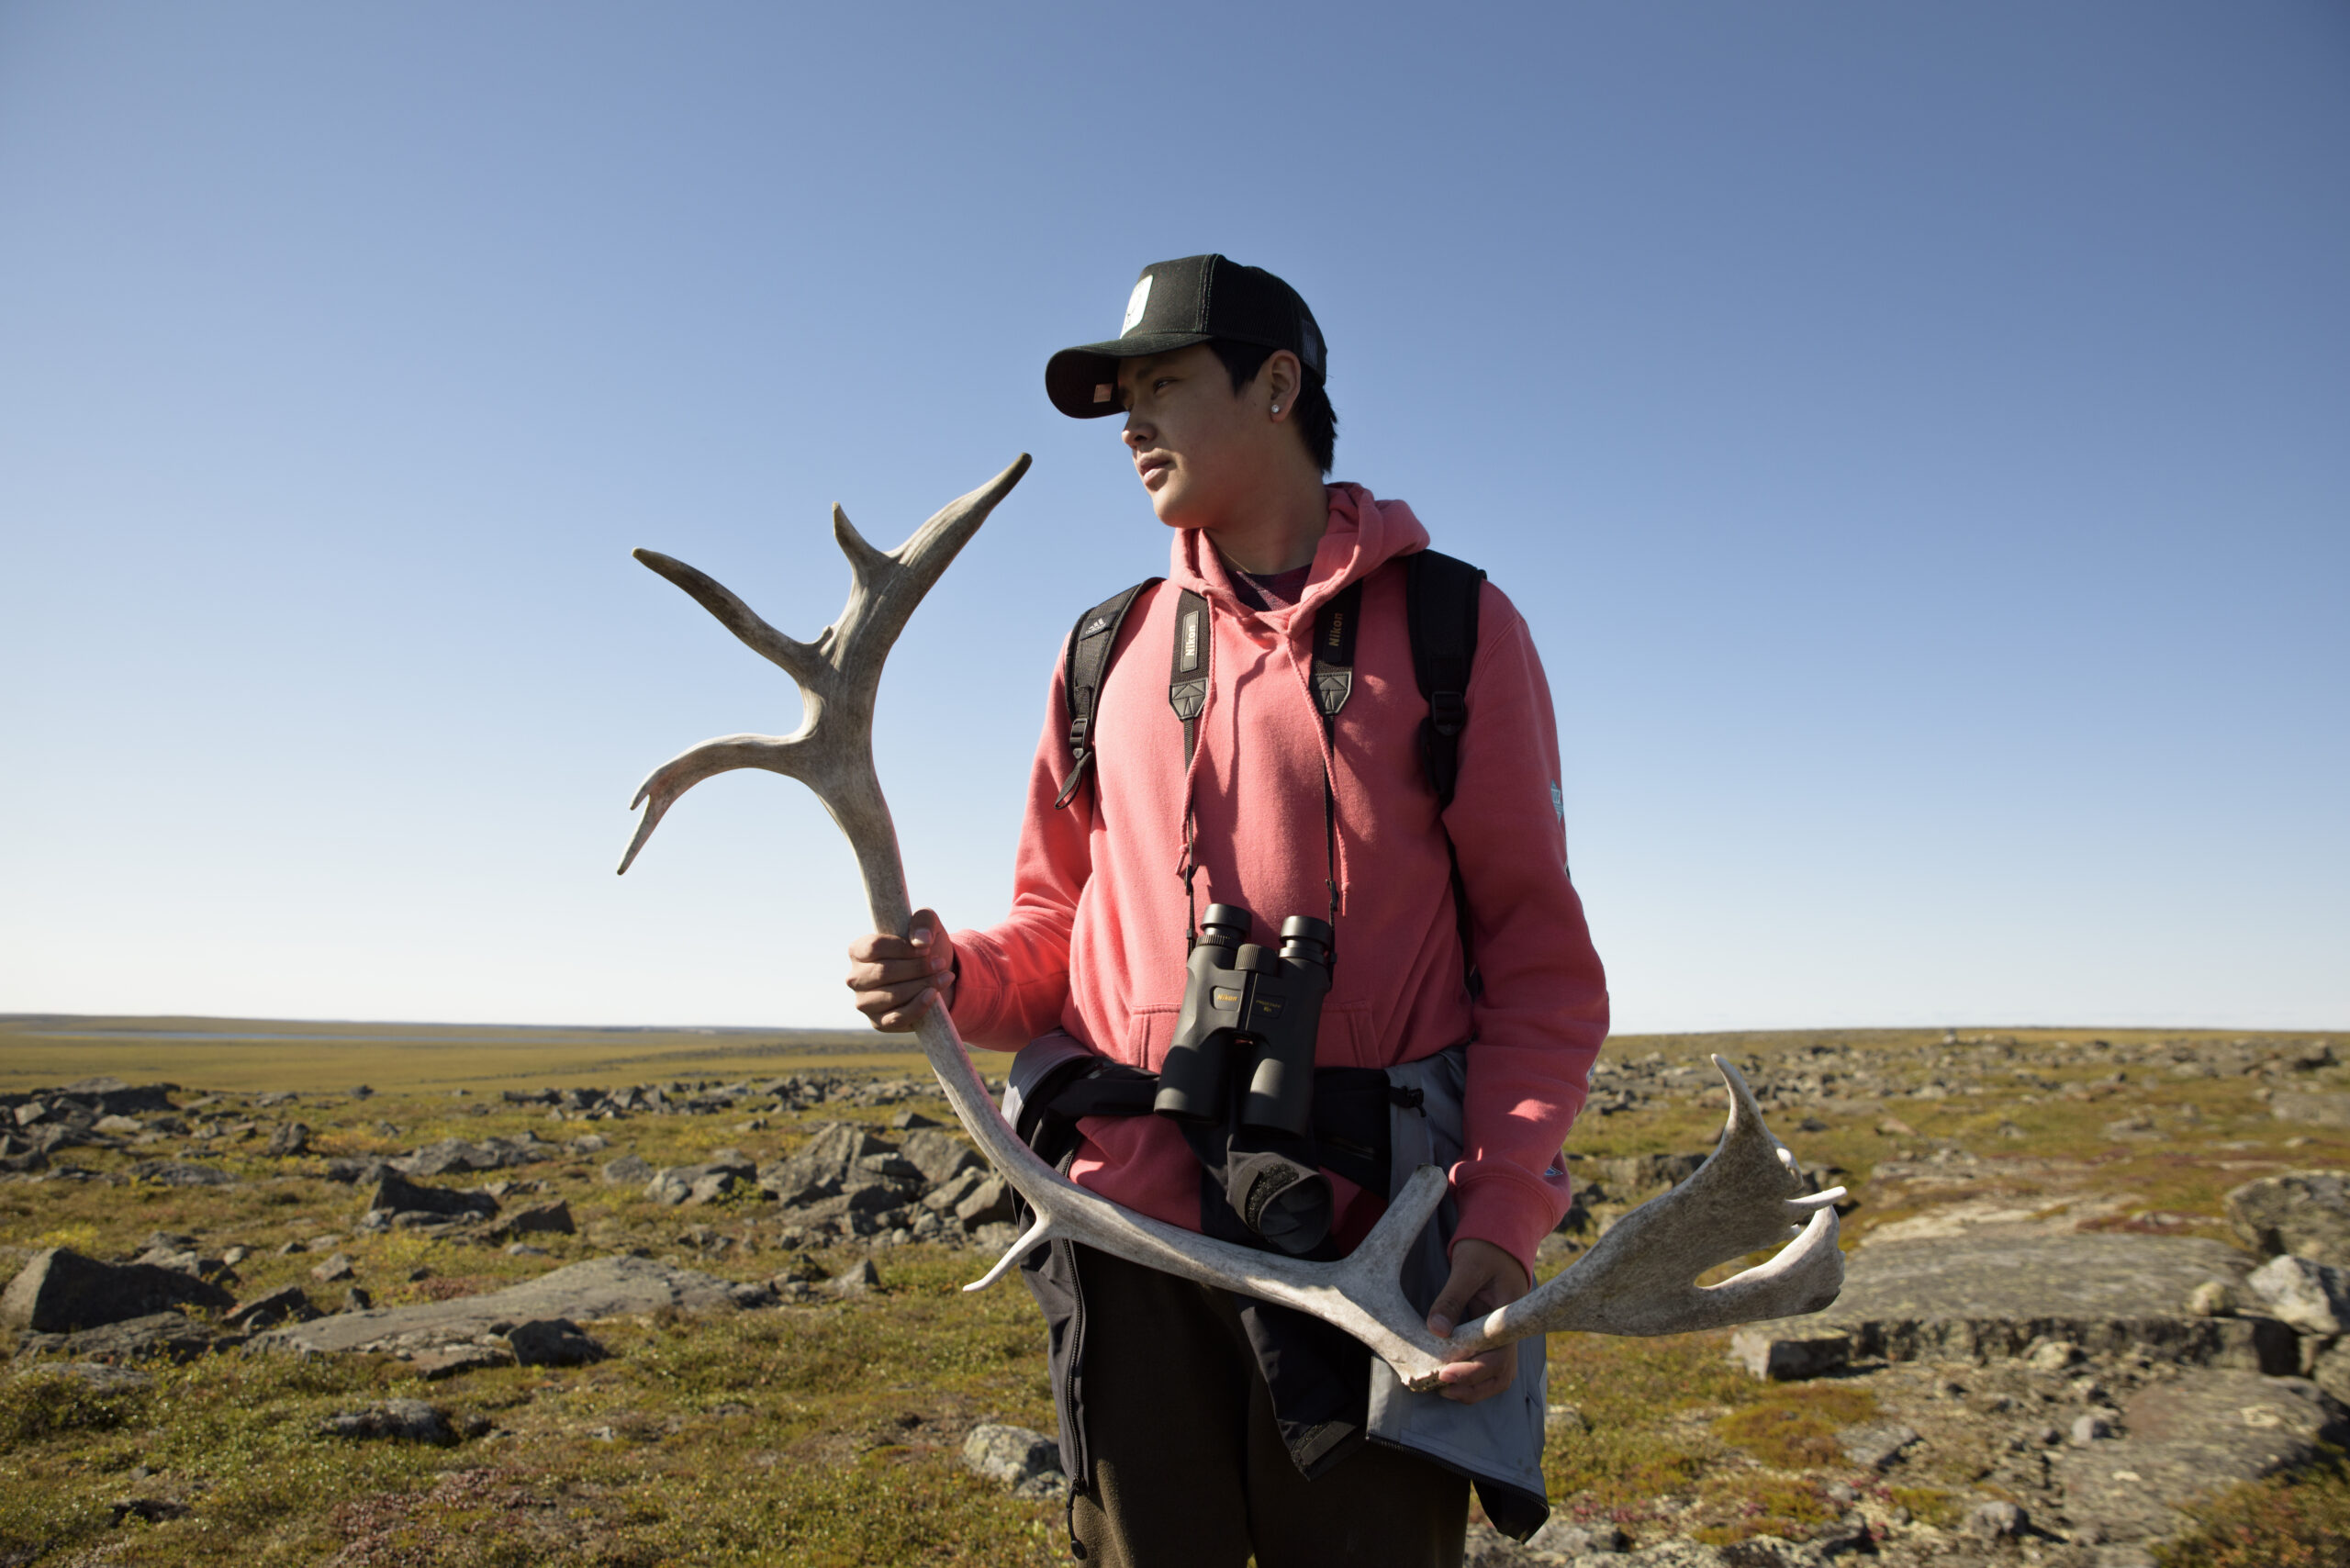 Youth researcher Ahri Ekendia holds a caribou antler while scouting the landscape for a herd as part of the Ekwǫ̀ Nàxoède K’è: Boots on the Ground program, which trains youth in research techniques, biology and natural sciences. Photo: Pat Kane / The Narwhal